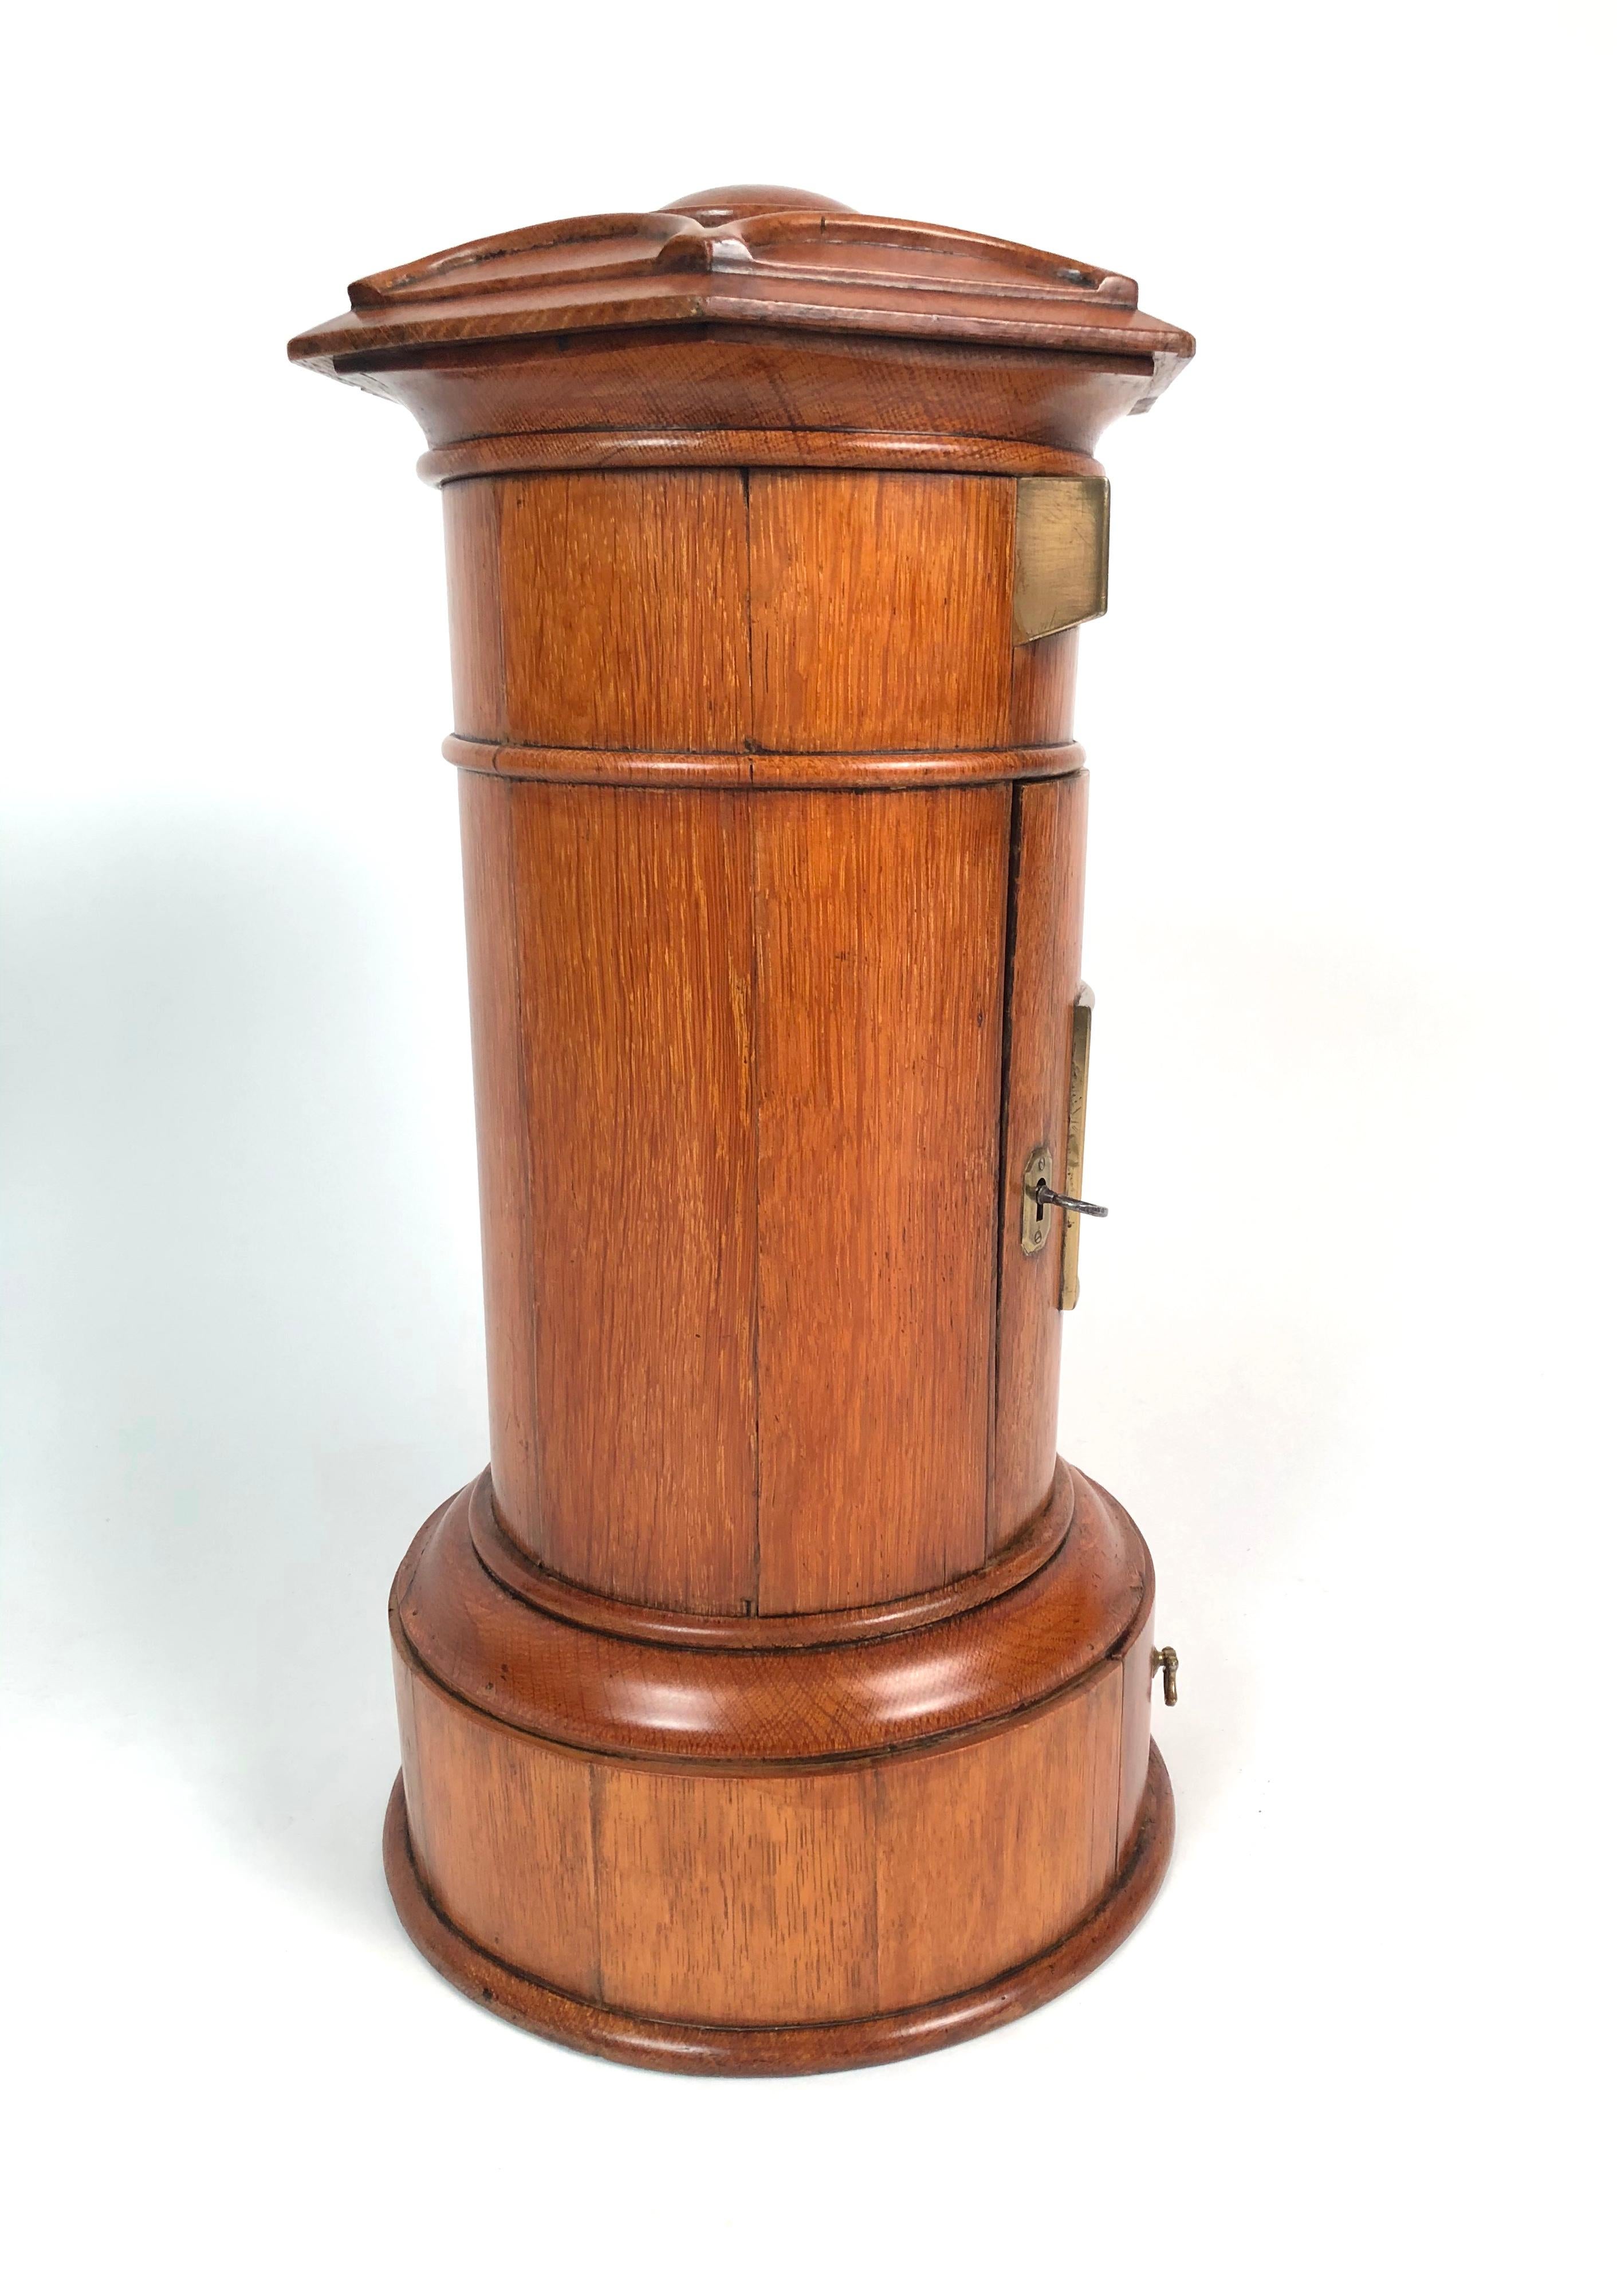 A charming and finely made English Victorian country house Royal Mail letter box of typical pillar form with octagonal top in golden oak, with brass letter slot, locking door with handwritten schedule of Royal Mail collection times, and drawer